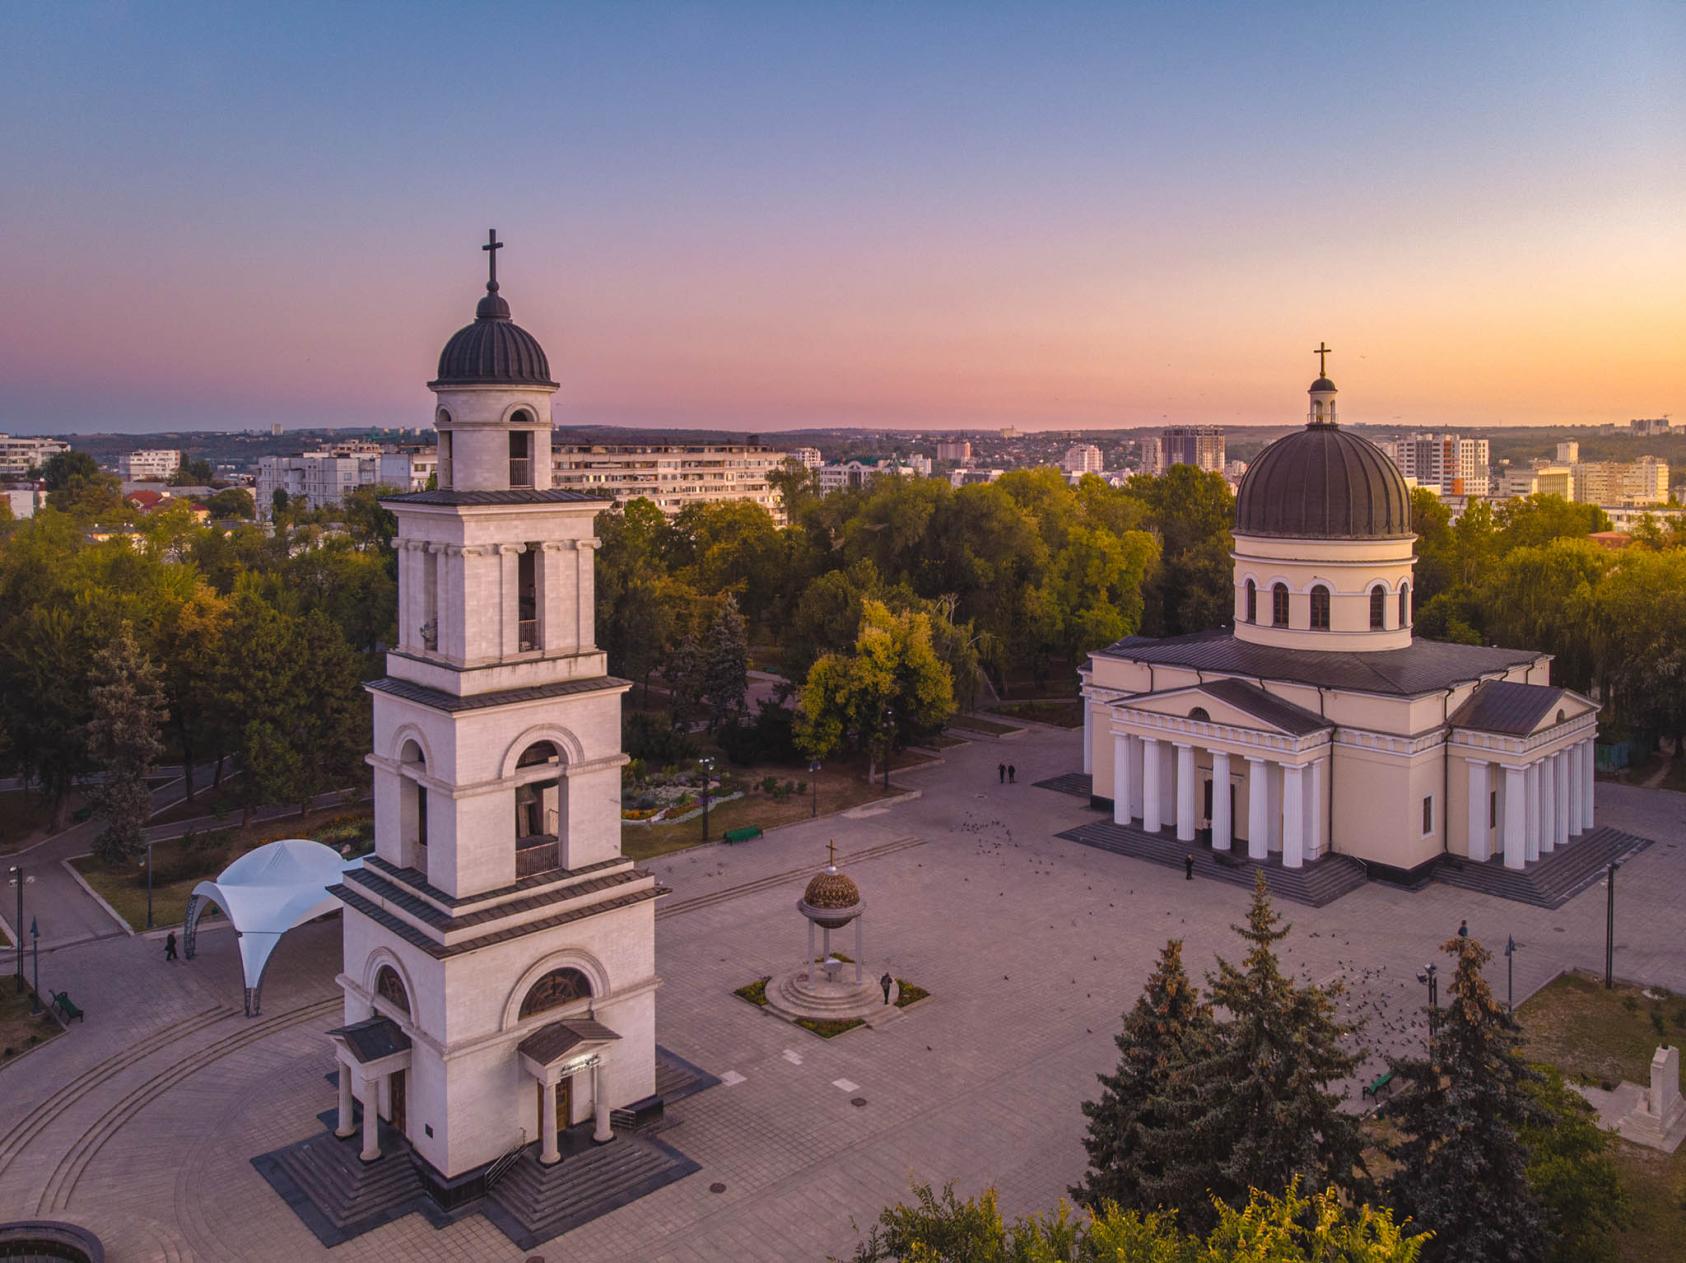 The Cathedral of Christ’s Nativity, seat of the Moldovan Orthodox Church, stands in early morning light next to its bell tower in central Chisinau. (Pelin Oleg/CC License 4.0)